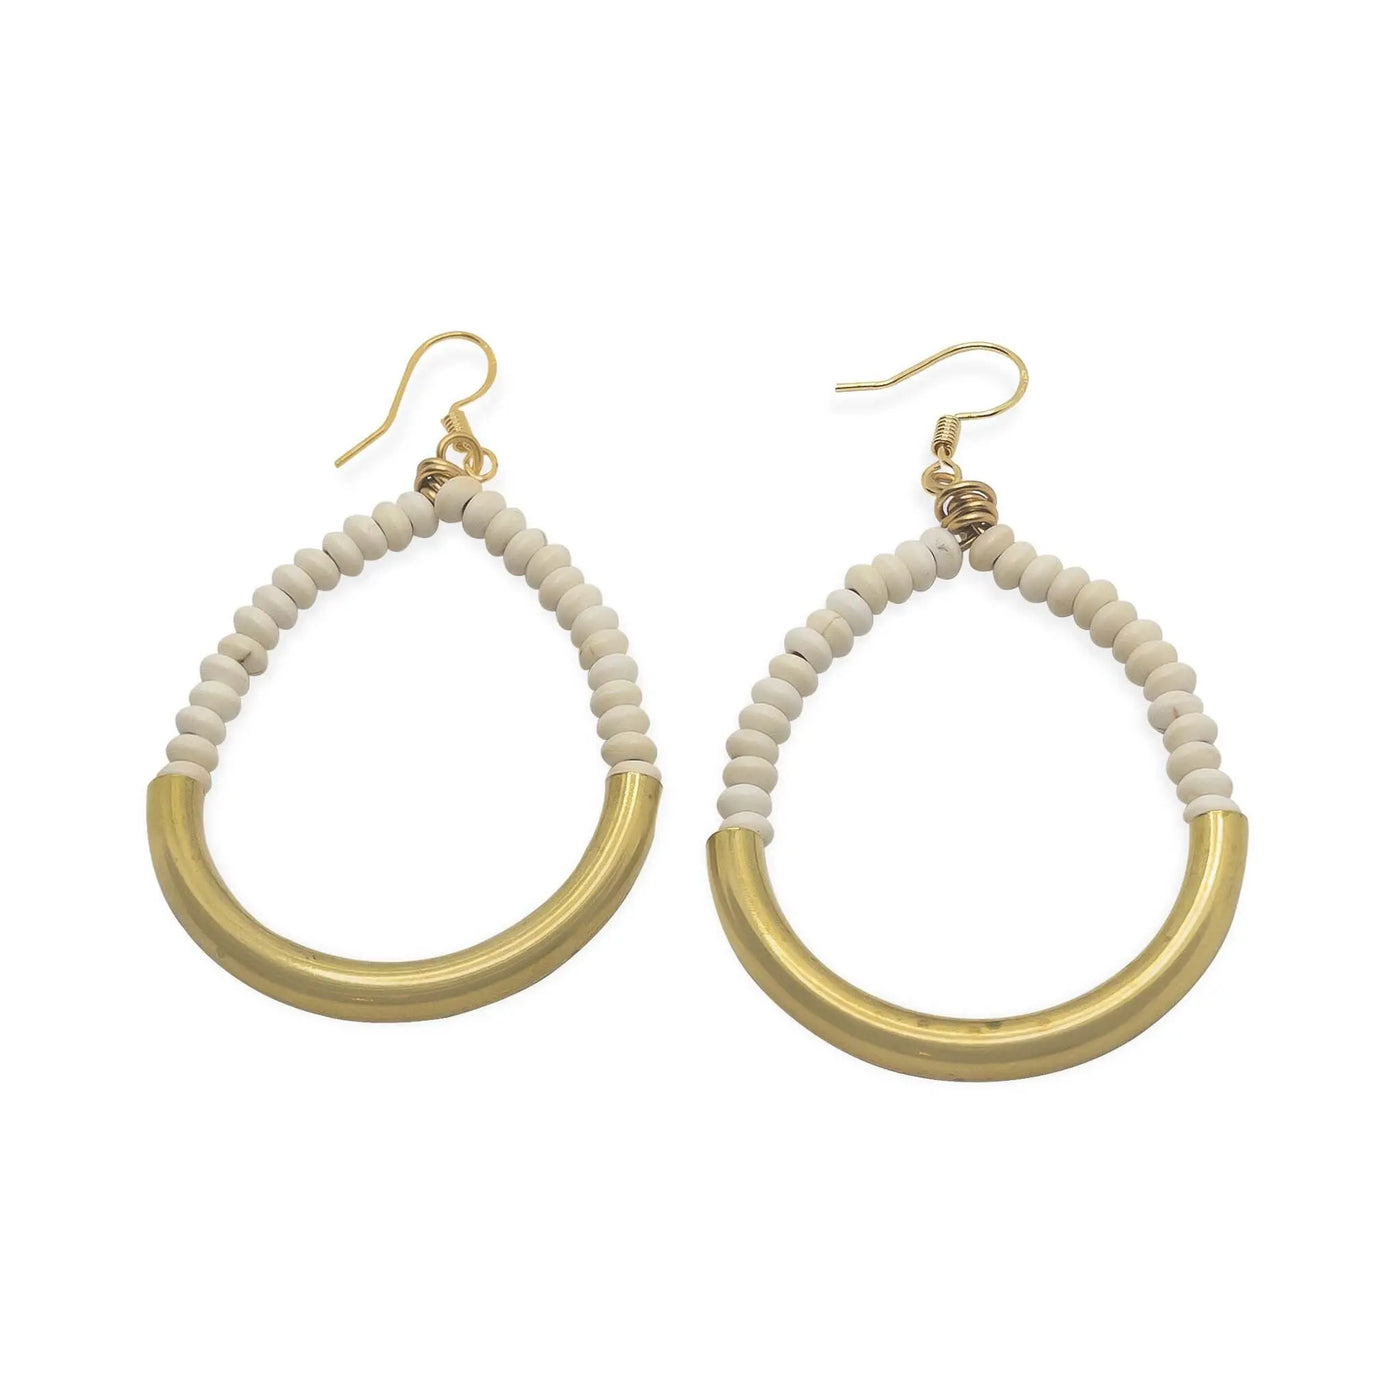 The Stacey Earrings LaCkore Couture